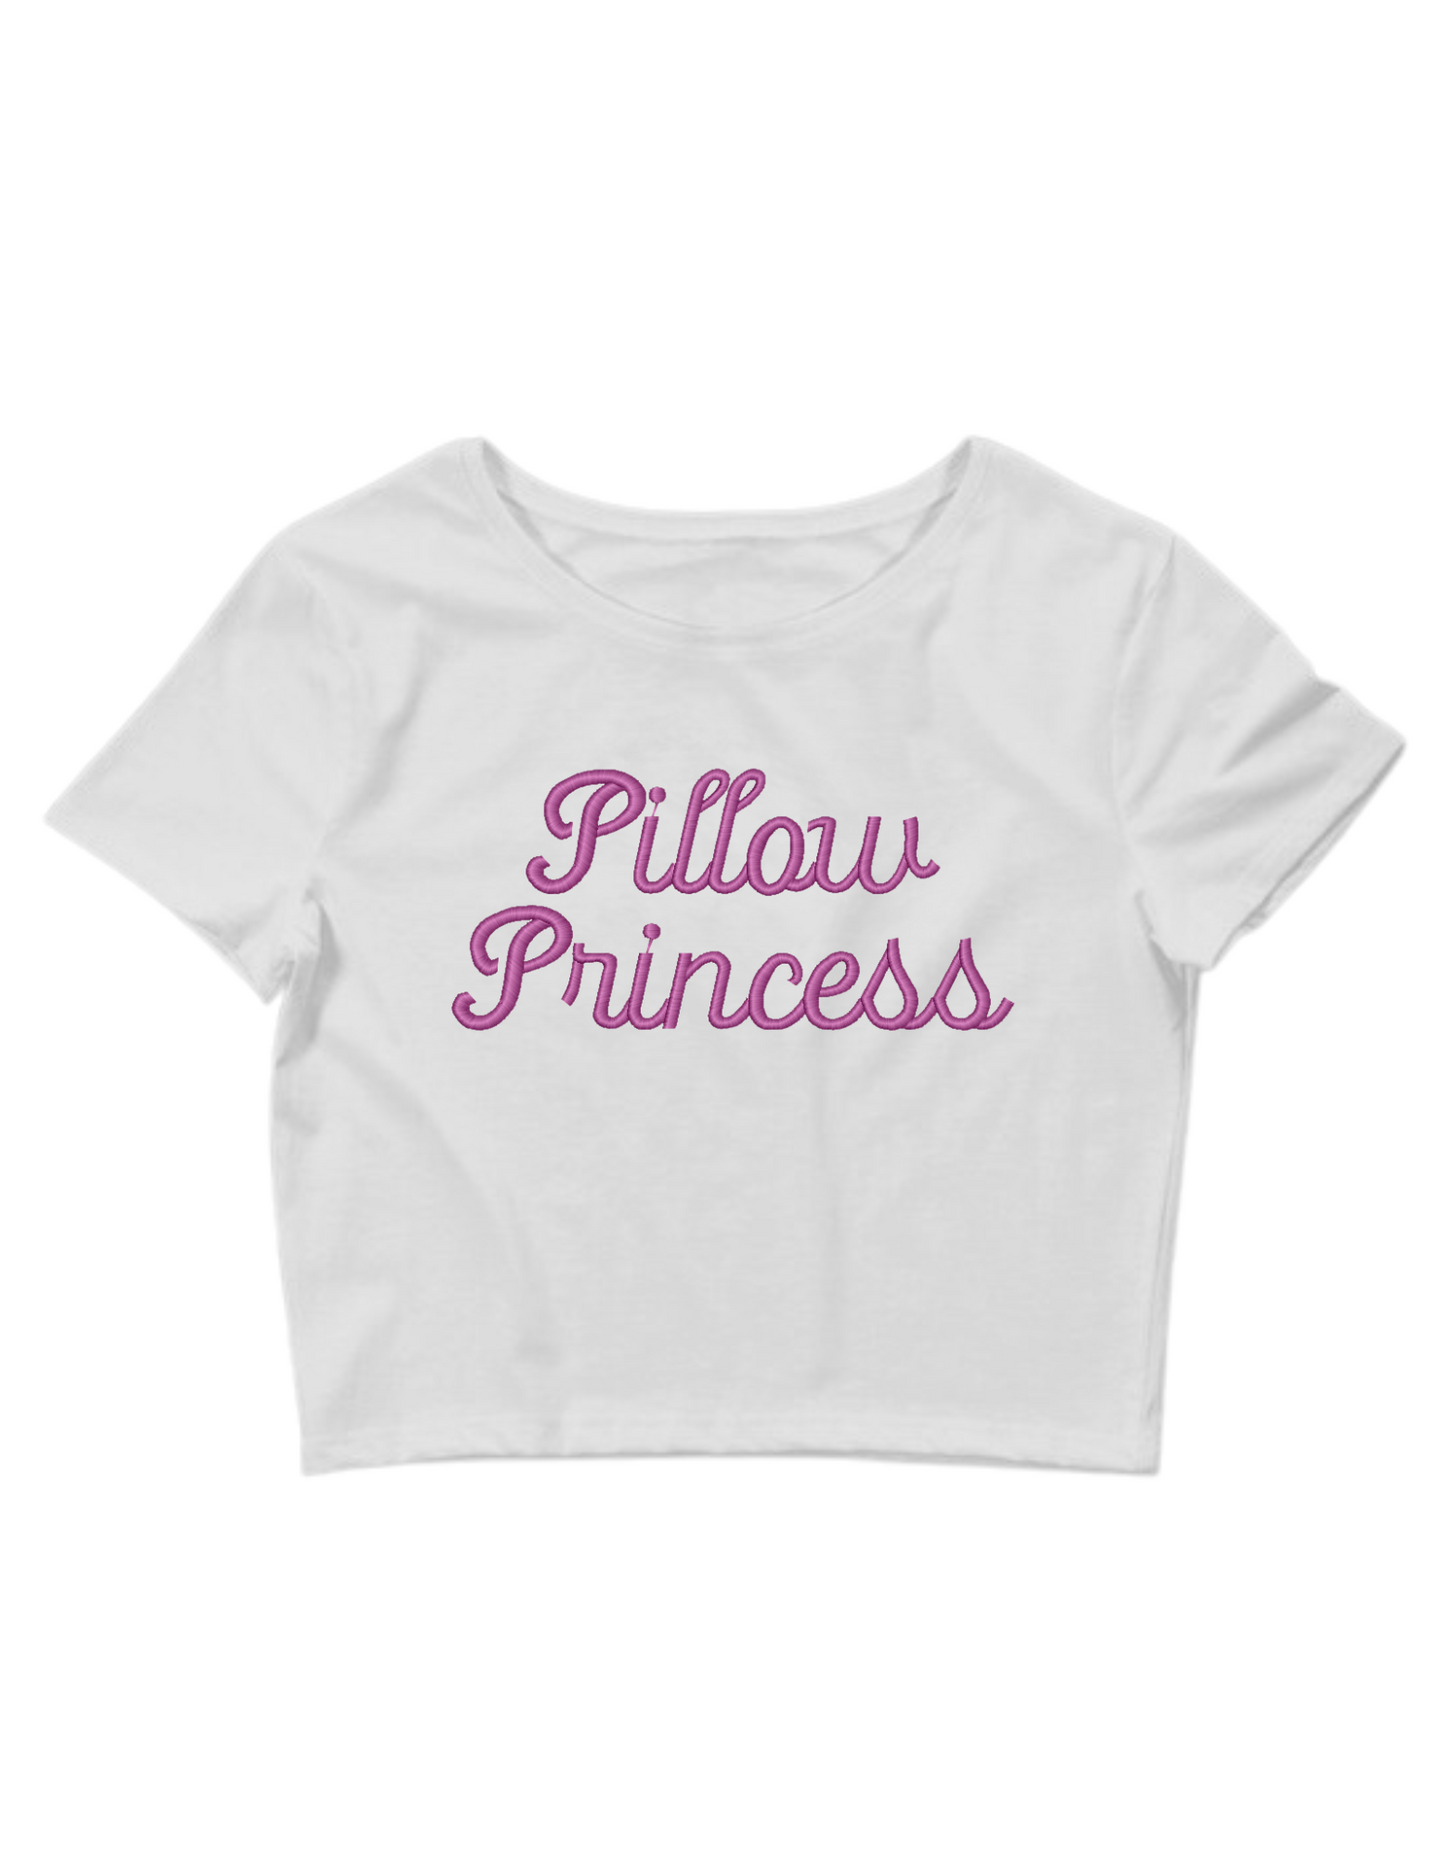 Embroidered Pillow Princess Baby Tee